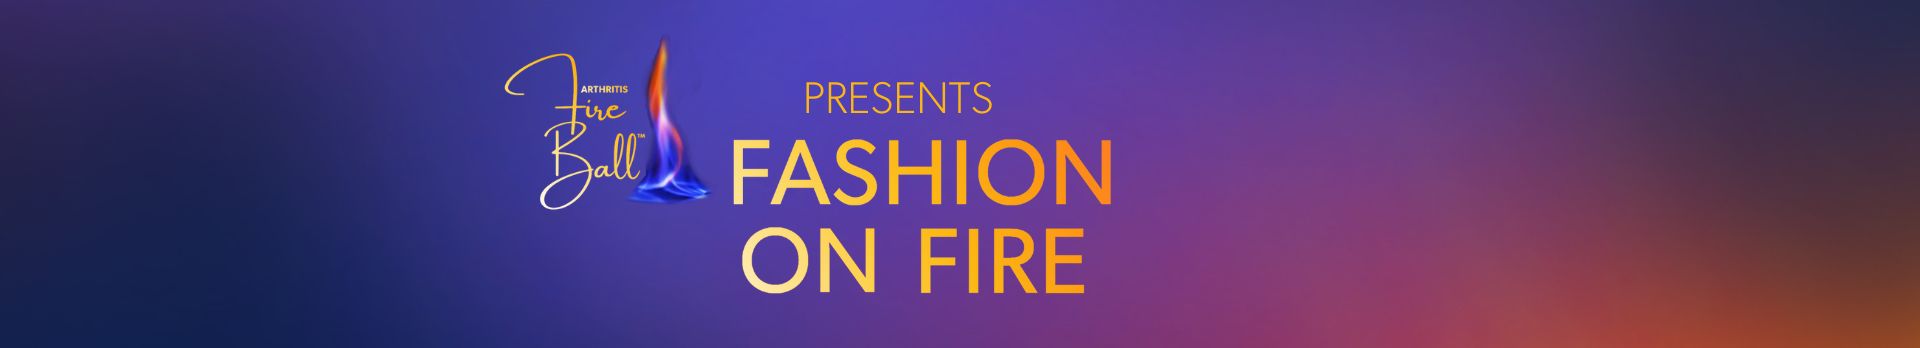 banner with 'Arthritis Fire Ball Presents Fasion on Fire'